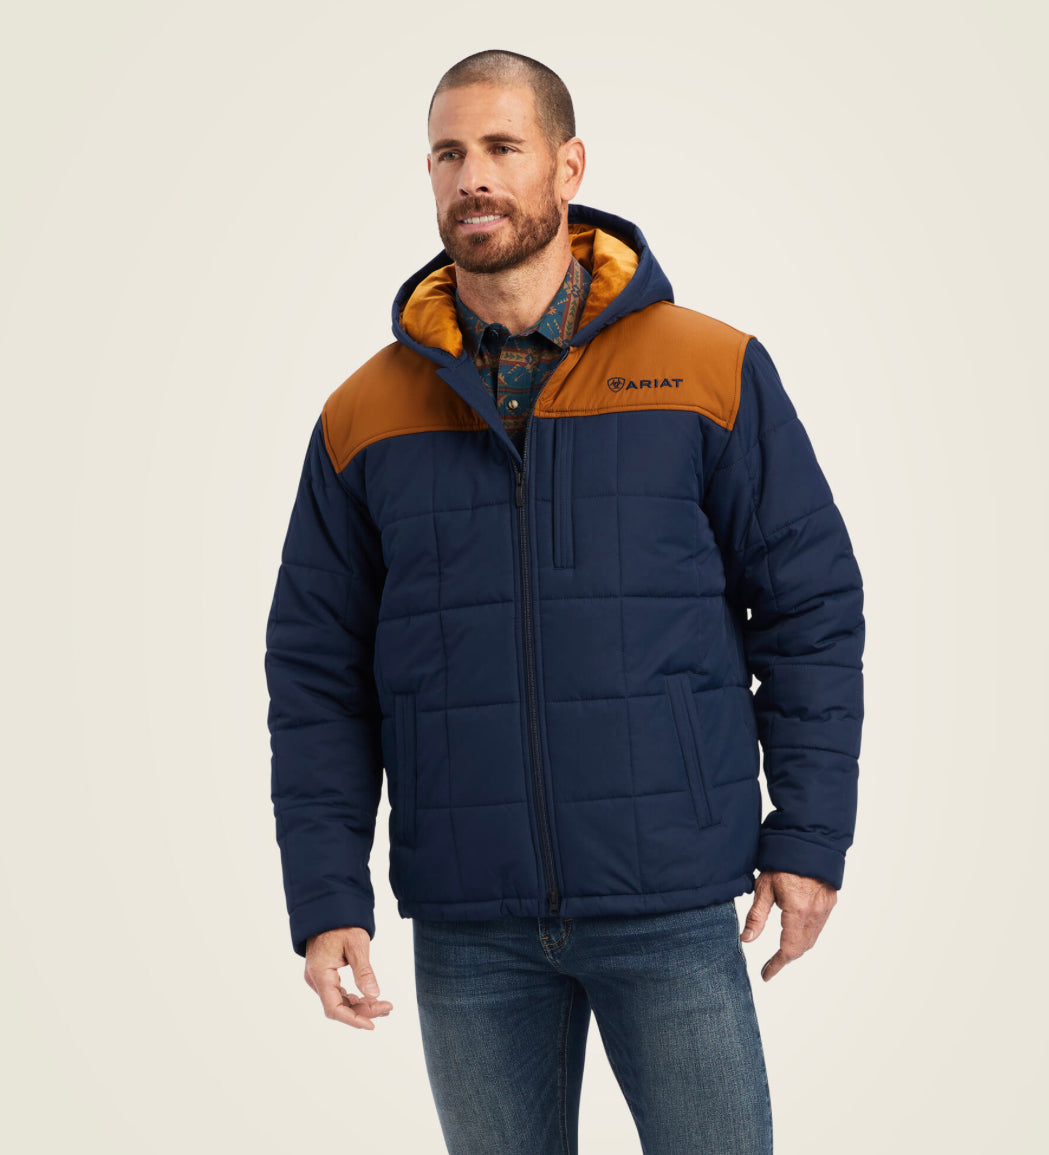 Men's Ariat Hooded Insulated Jacket - Navy